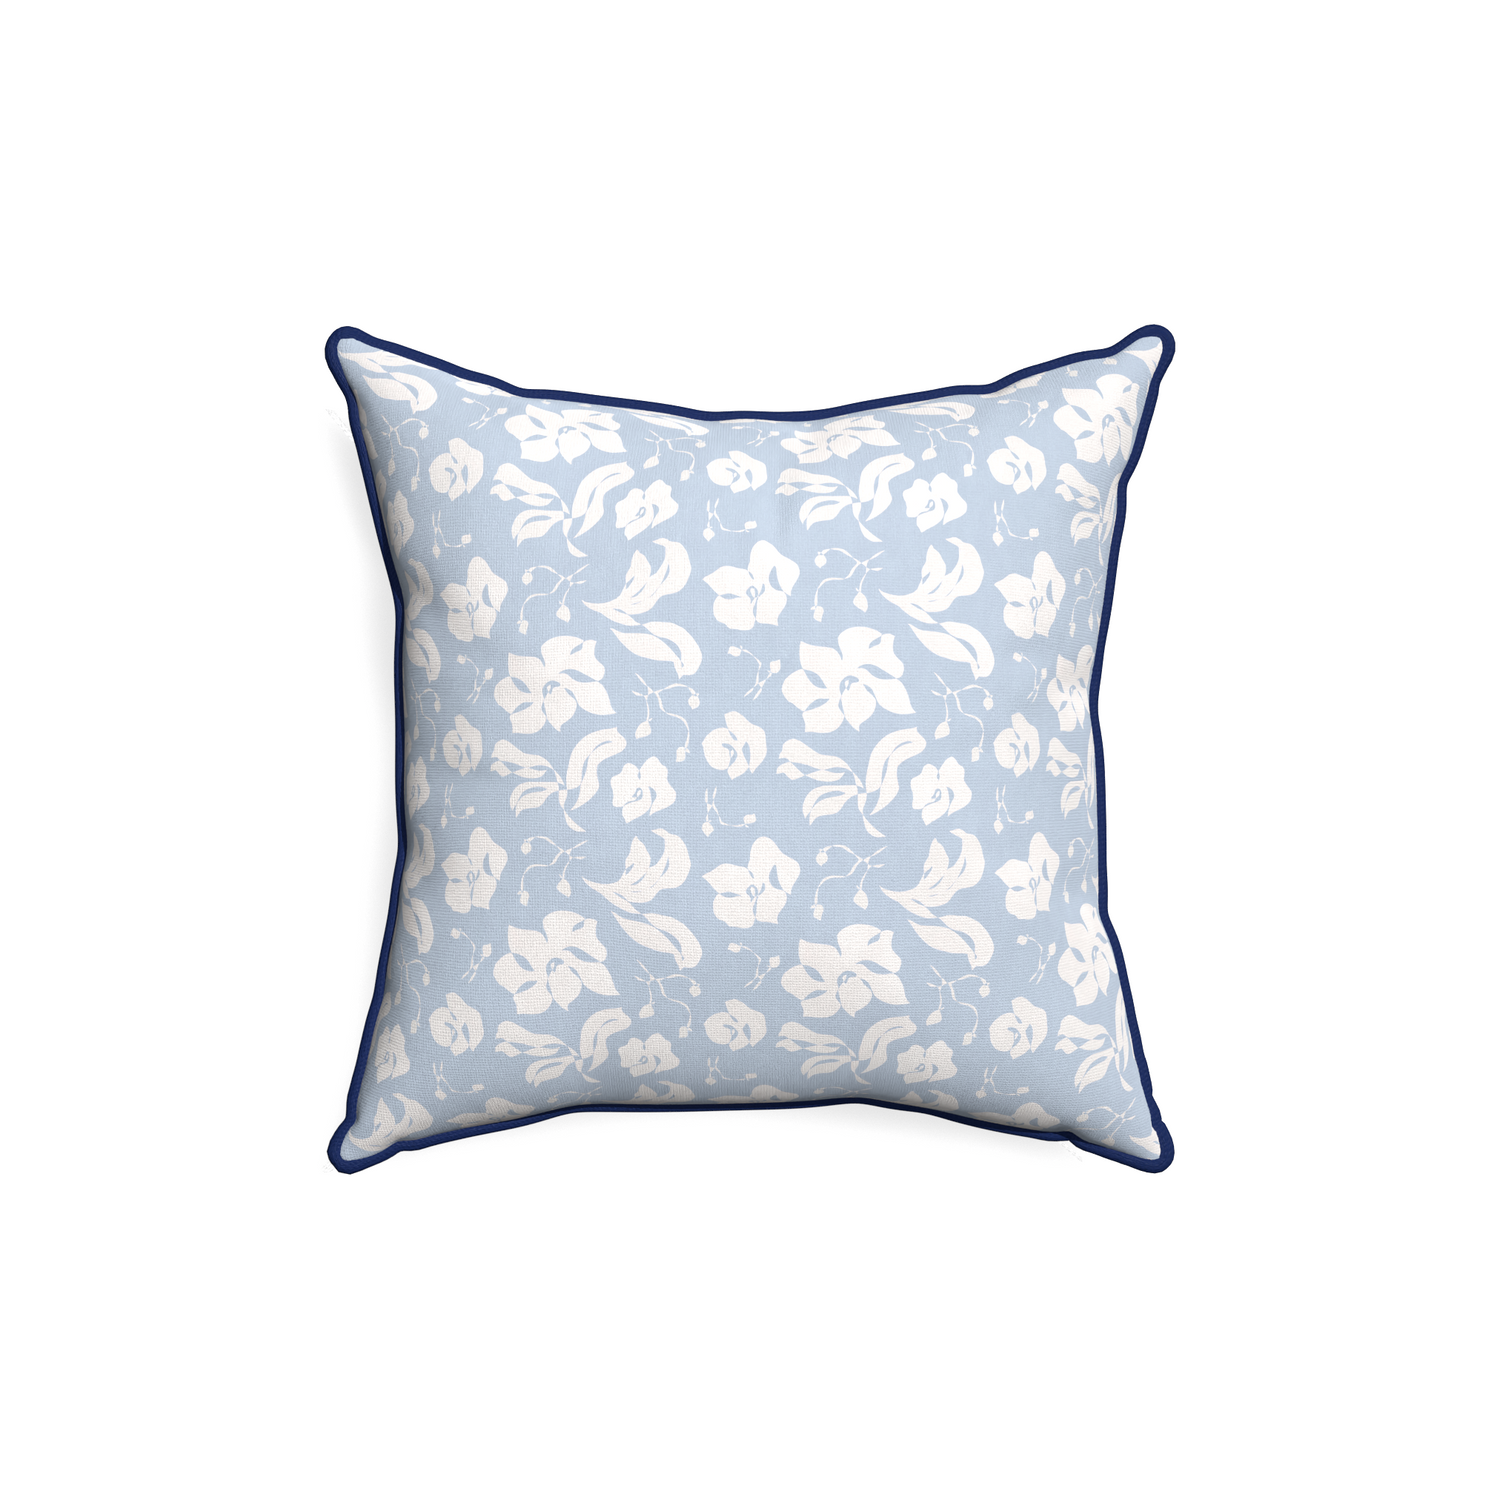 18-square georgia custom pillow with midnight piping on white background